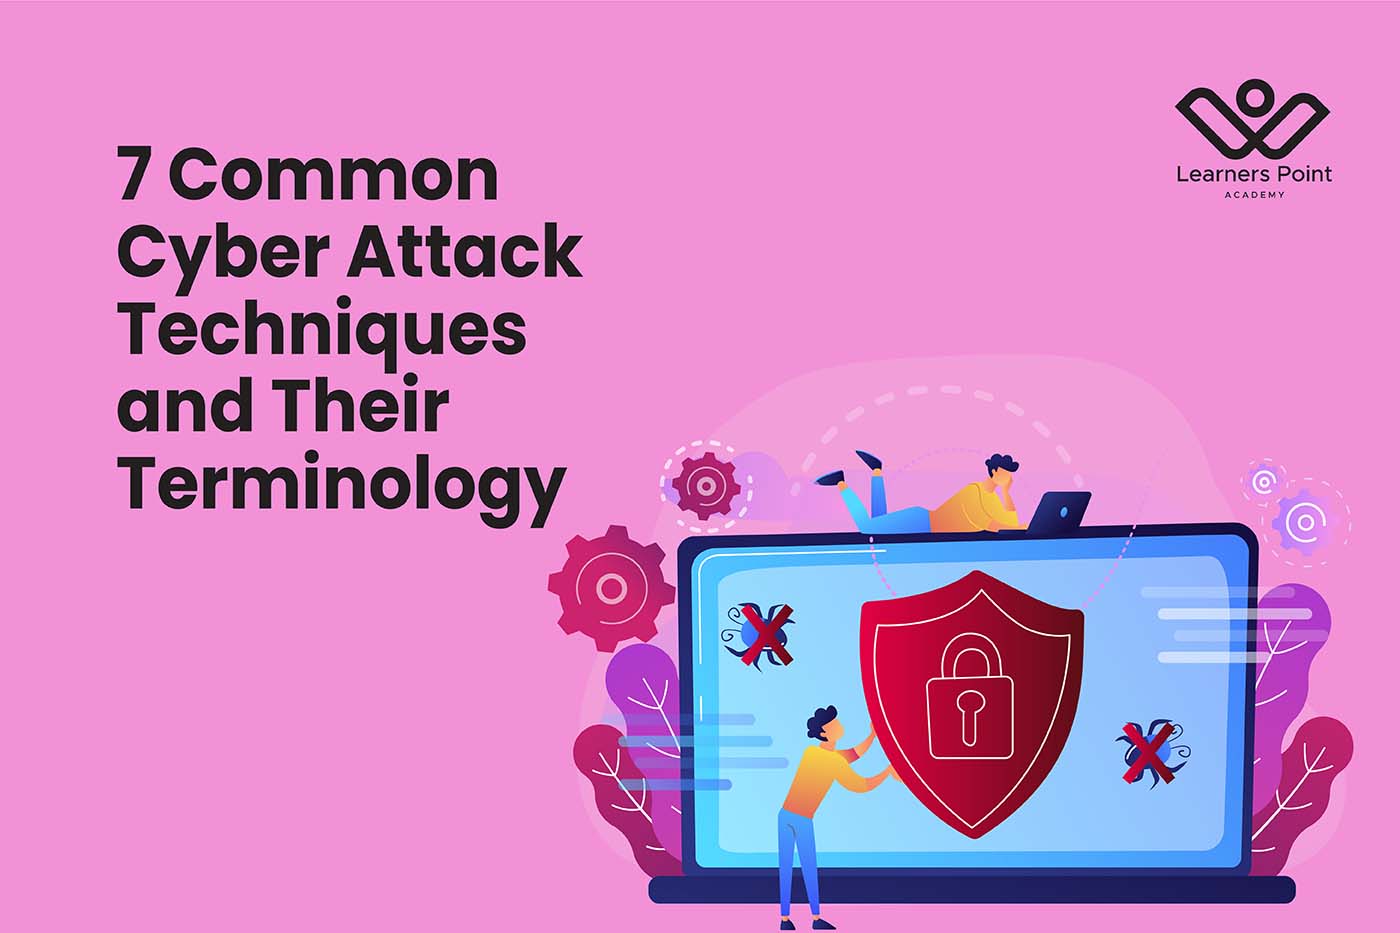 7 Common Cyber Attack Techniques and Their Terminology